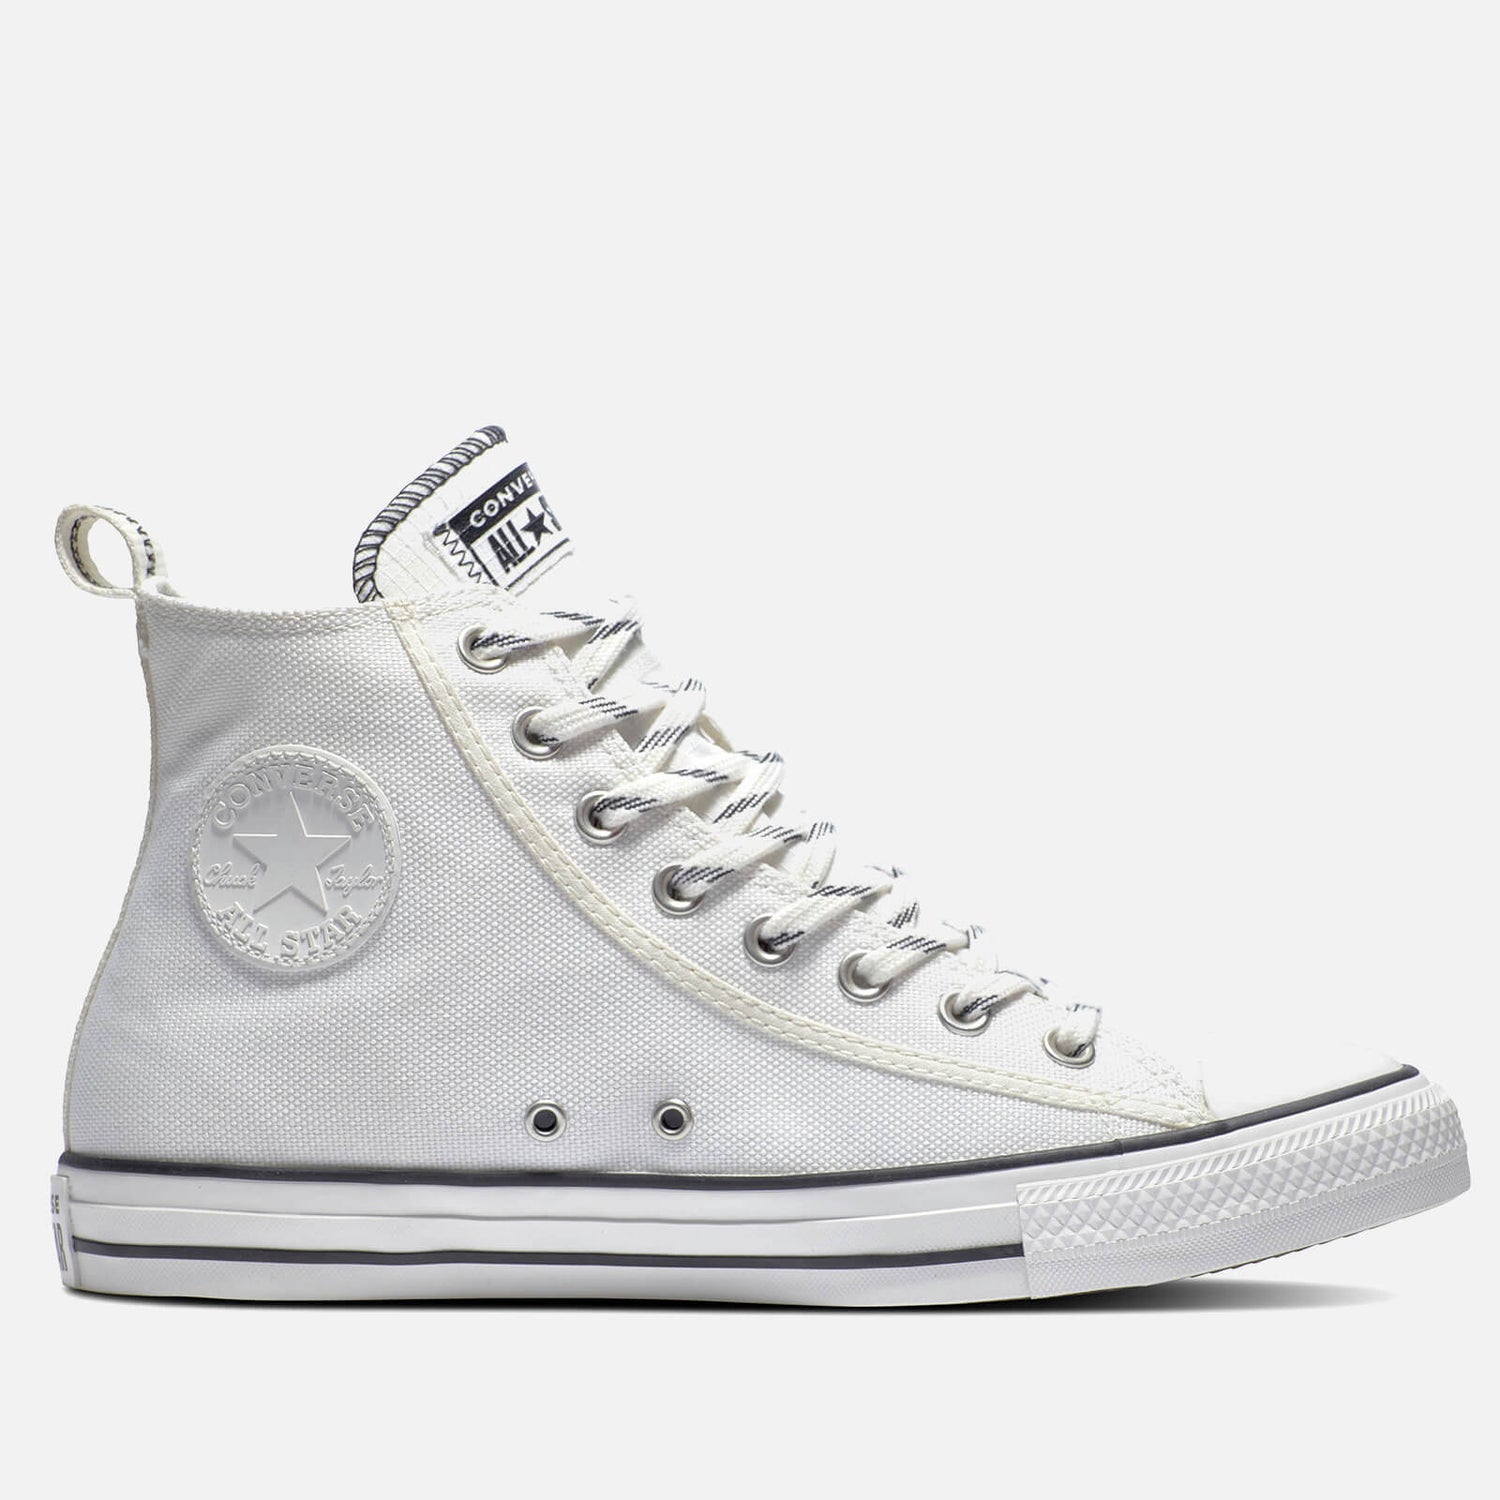 Converse Men's Chuck Taylor All Star Basket Utility Hi-Top Trainers - Vintage White